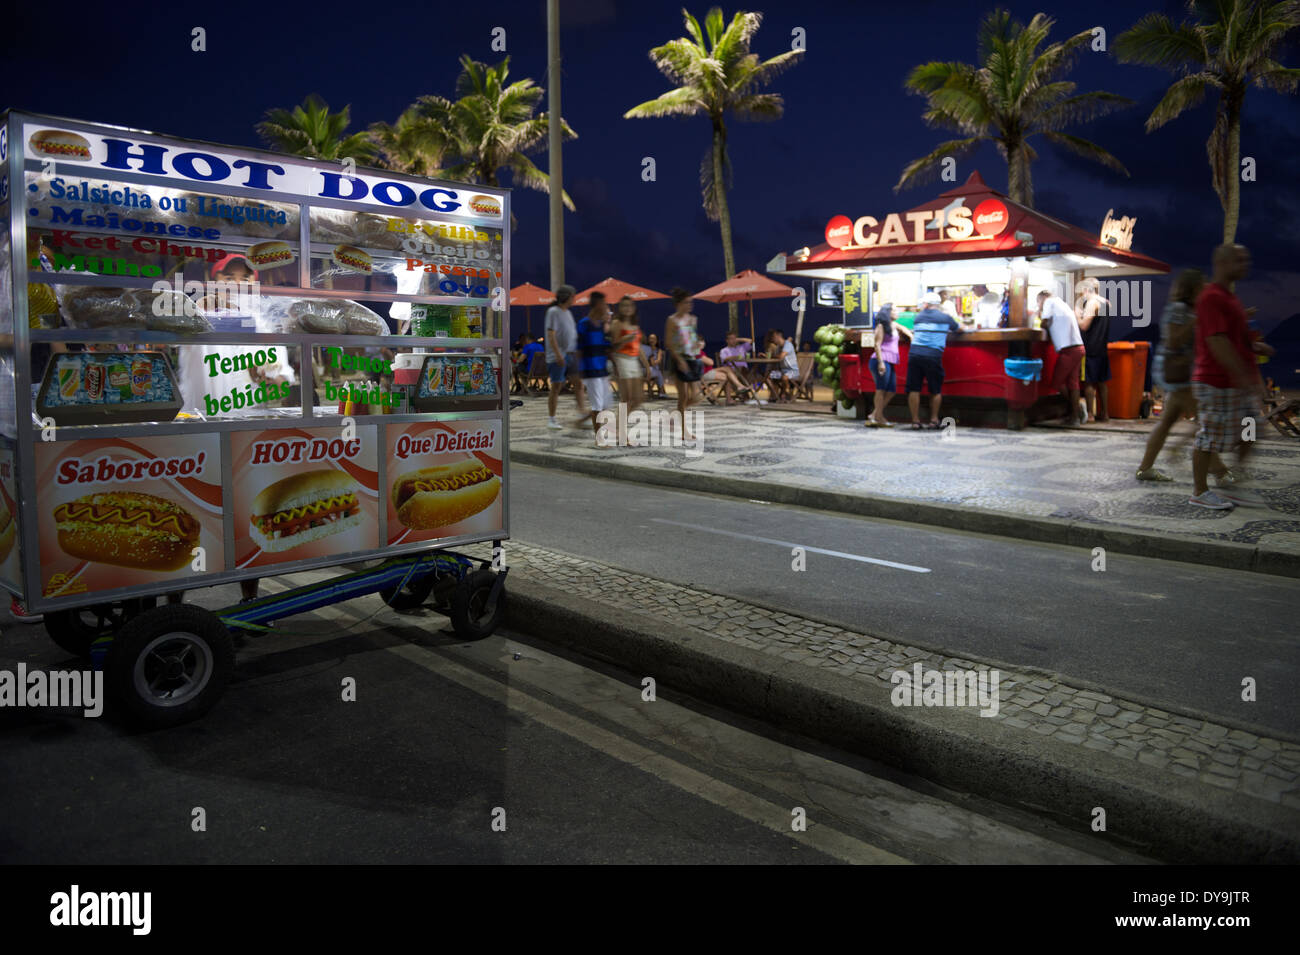 RIO DE JANEIRO, BRAZIL - JANUARY 19, 2014: Pedestriands pass a mobile hot dog stand in front of beach kiosk in a typical scene Stock Photo